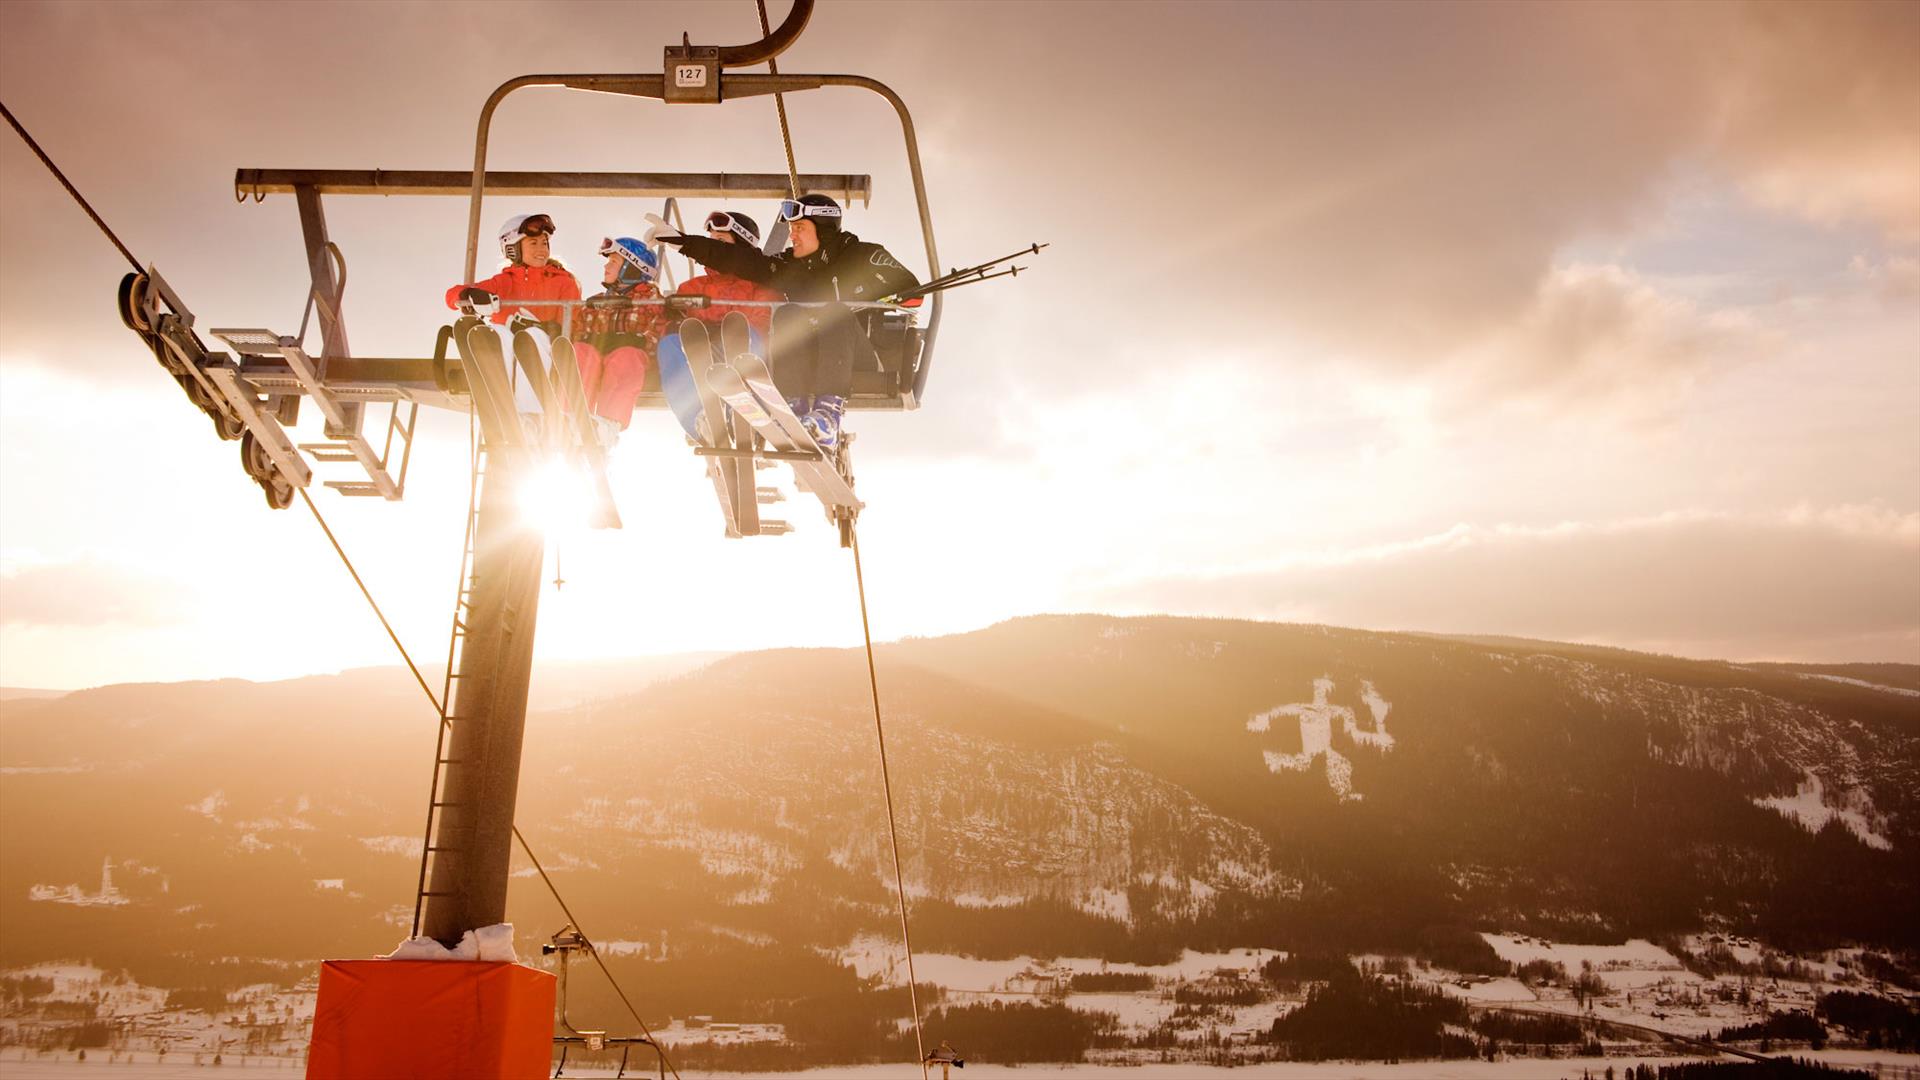 Alpine skiers in chairlift at Hafjell Alpine Resort